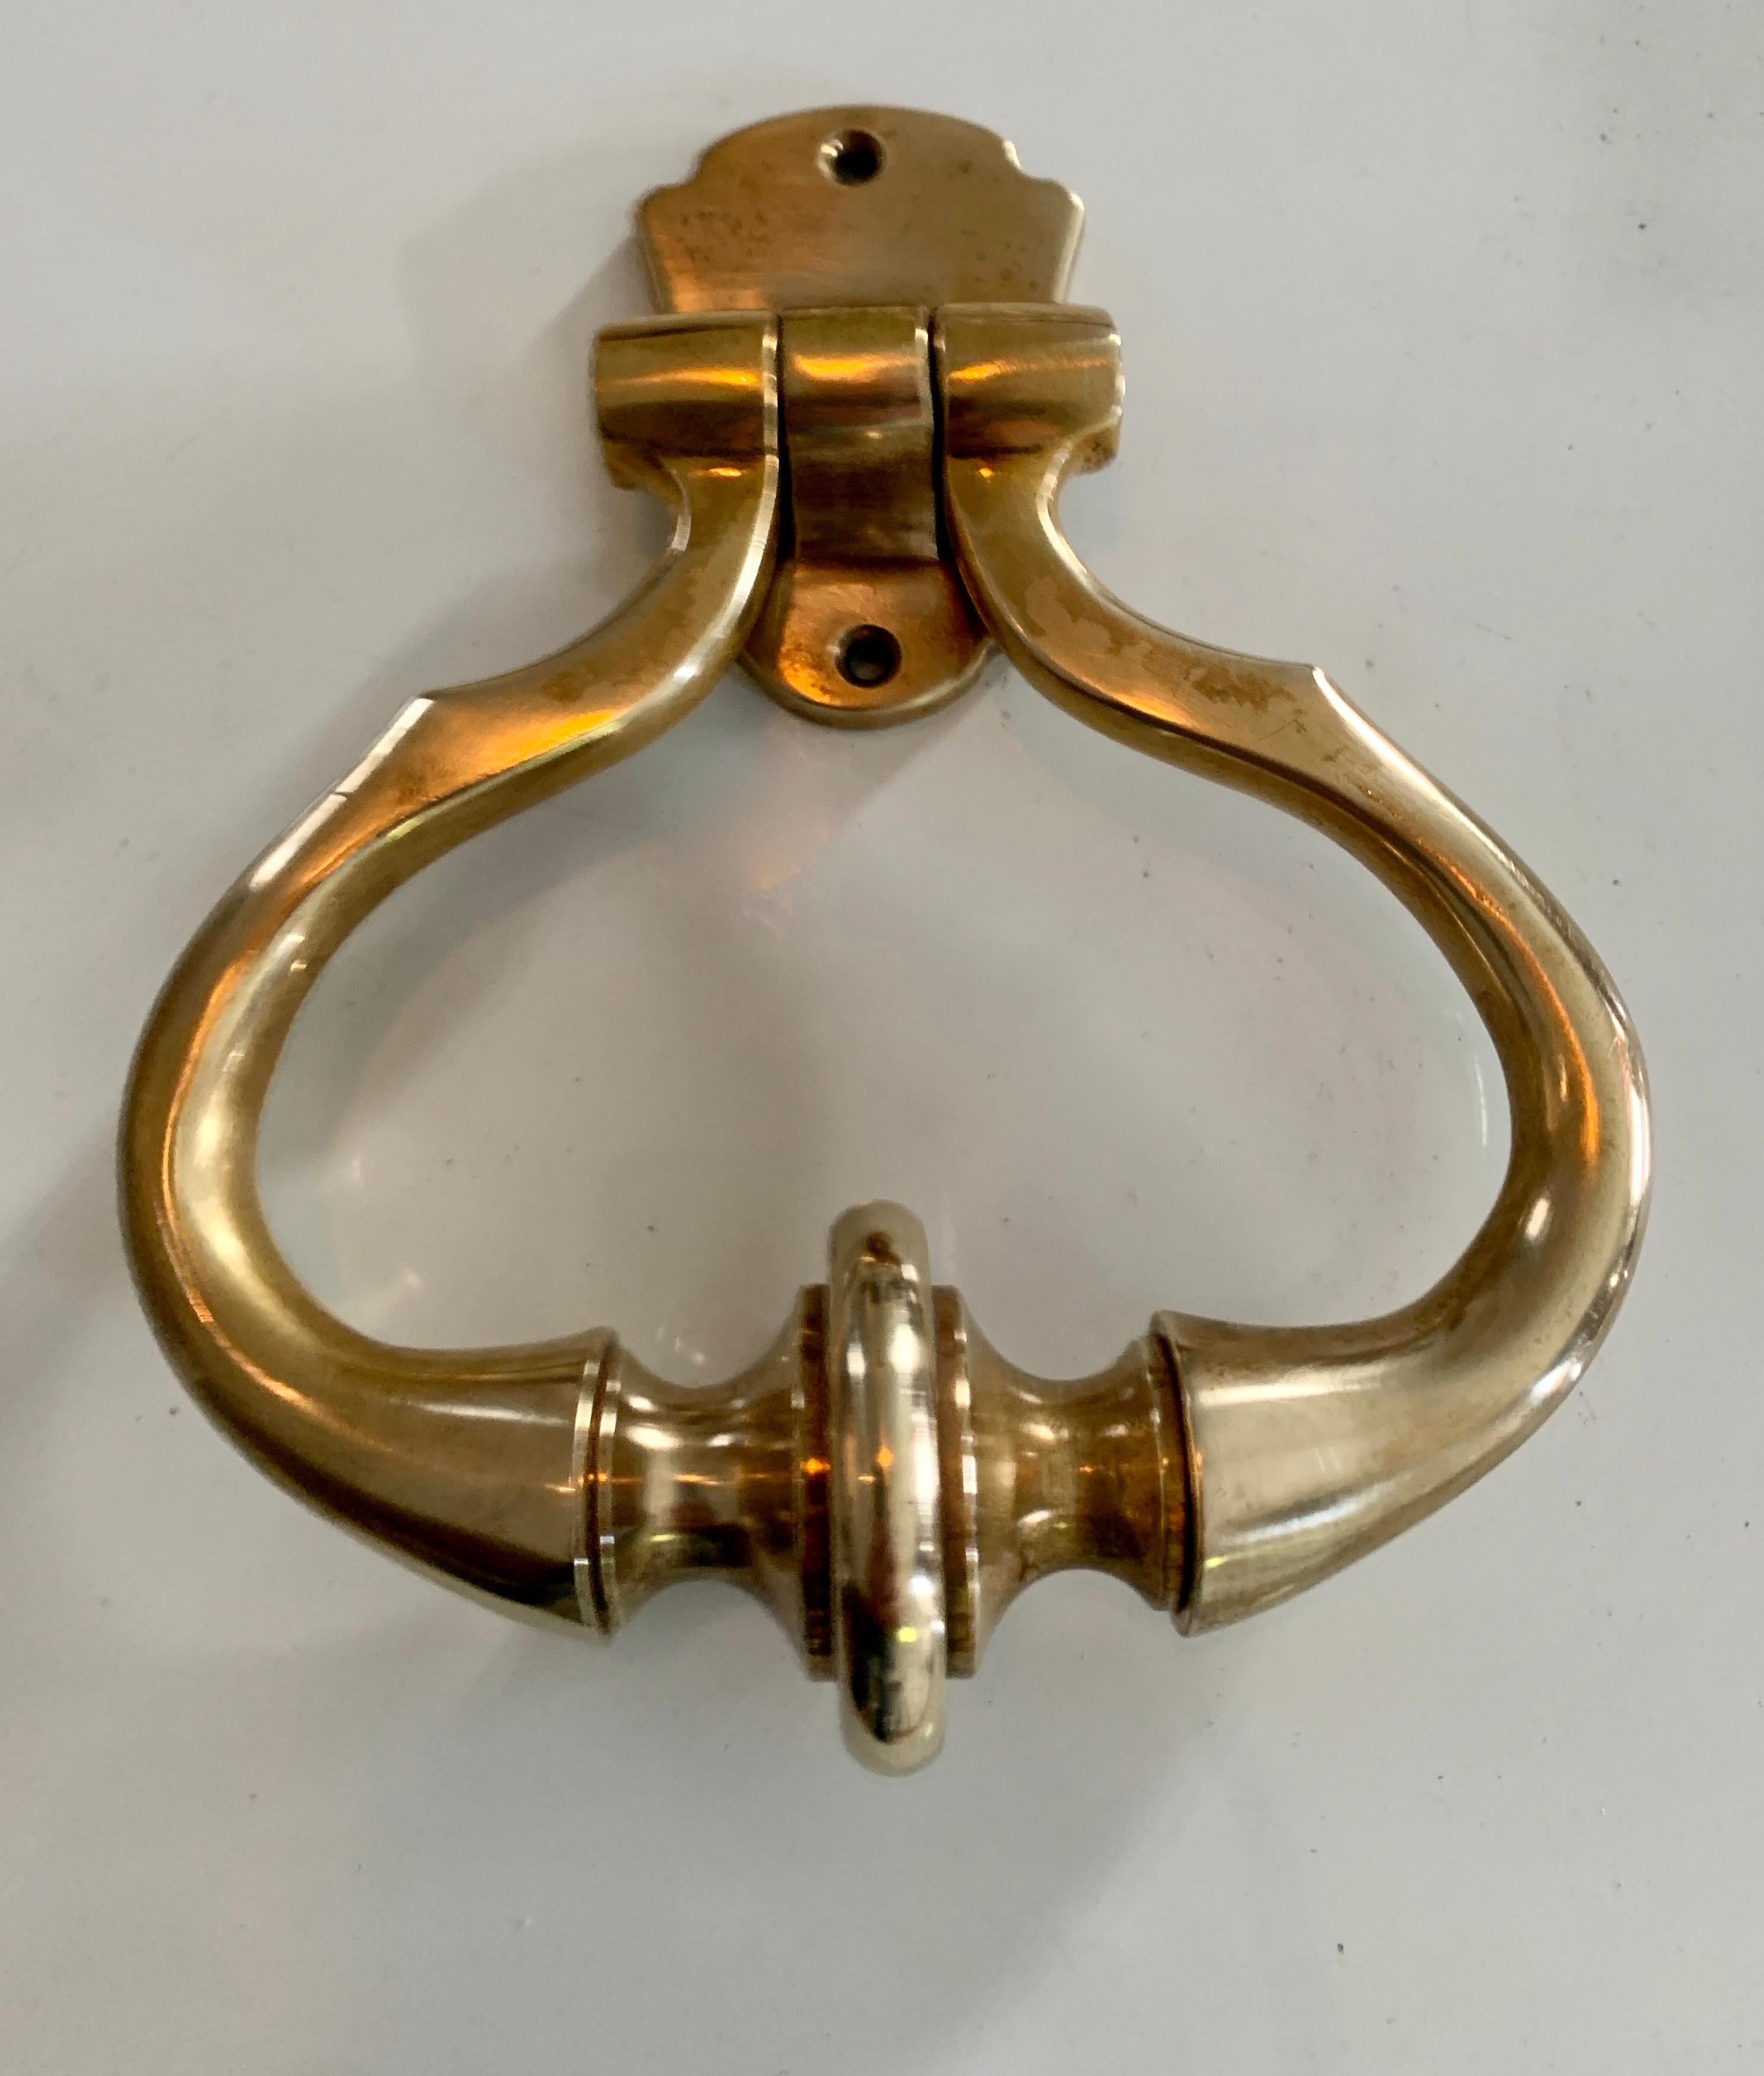 A large brass door knocker. Sophisticated in shape and design. The piece was acquired from an estate in Beverly Hills, CA. A wonderful piece, either or practical use or decor.